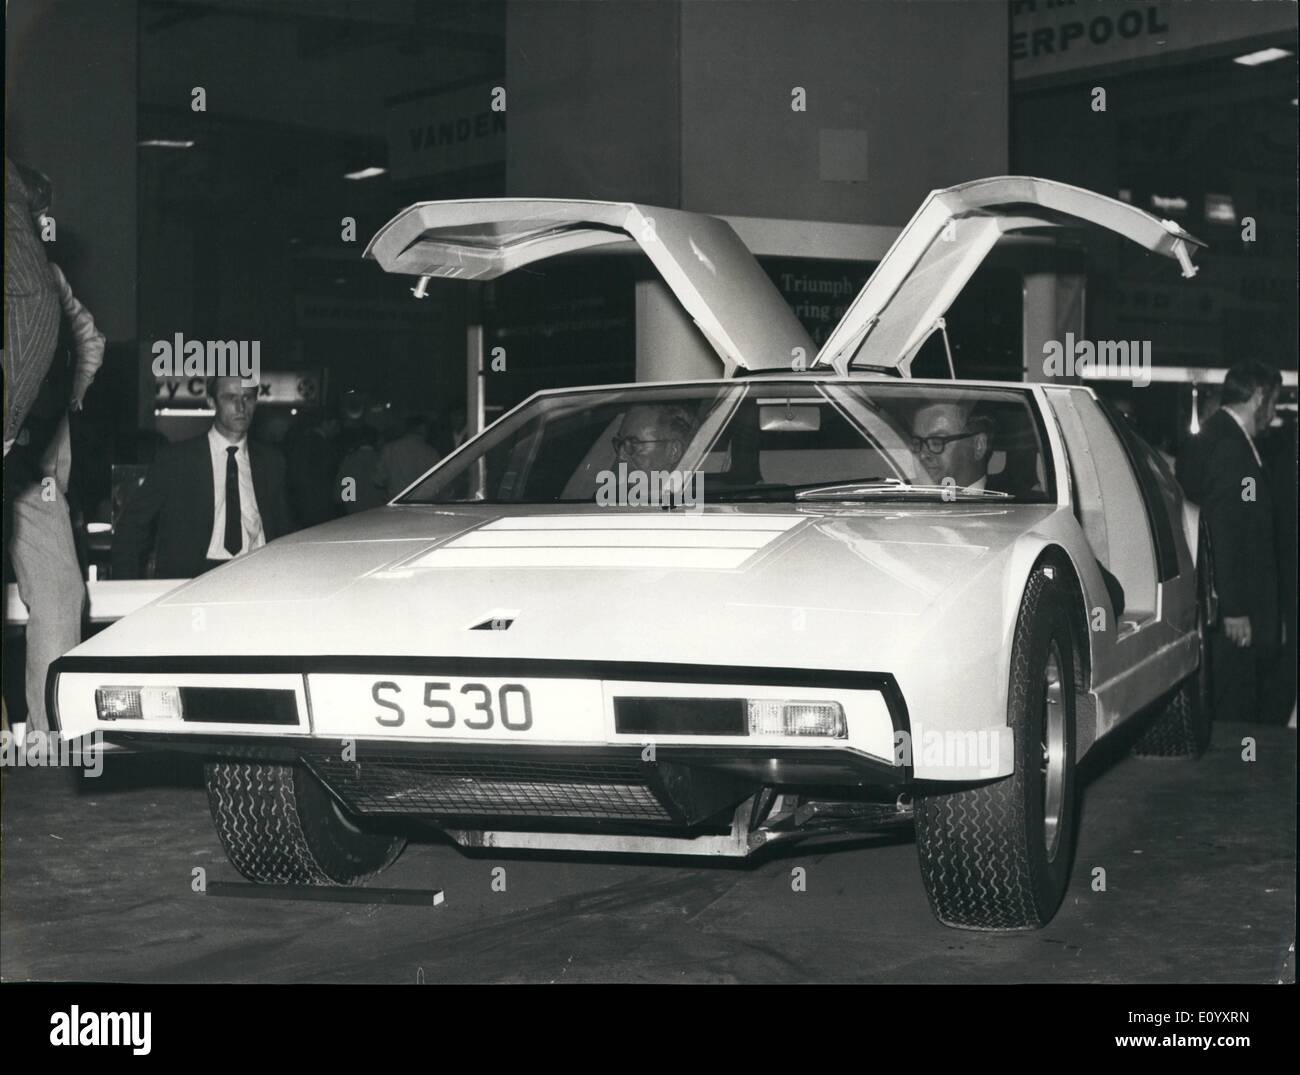 Oct. 10, 1971 - Preview of the motor show which opens at London's Earls Court tomorrow. Photo shows the new Siva S 530 Sports car, made by the new Dorset based firm of Neville Trickett Design Ltd. It will be made only to order and to each customer's special specification and will cost 2,000. It is seen here at today's preview of the Motor Show at Earls Court. Stock Photo